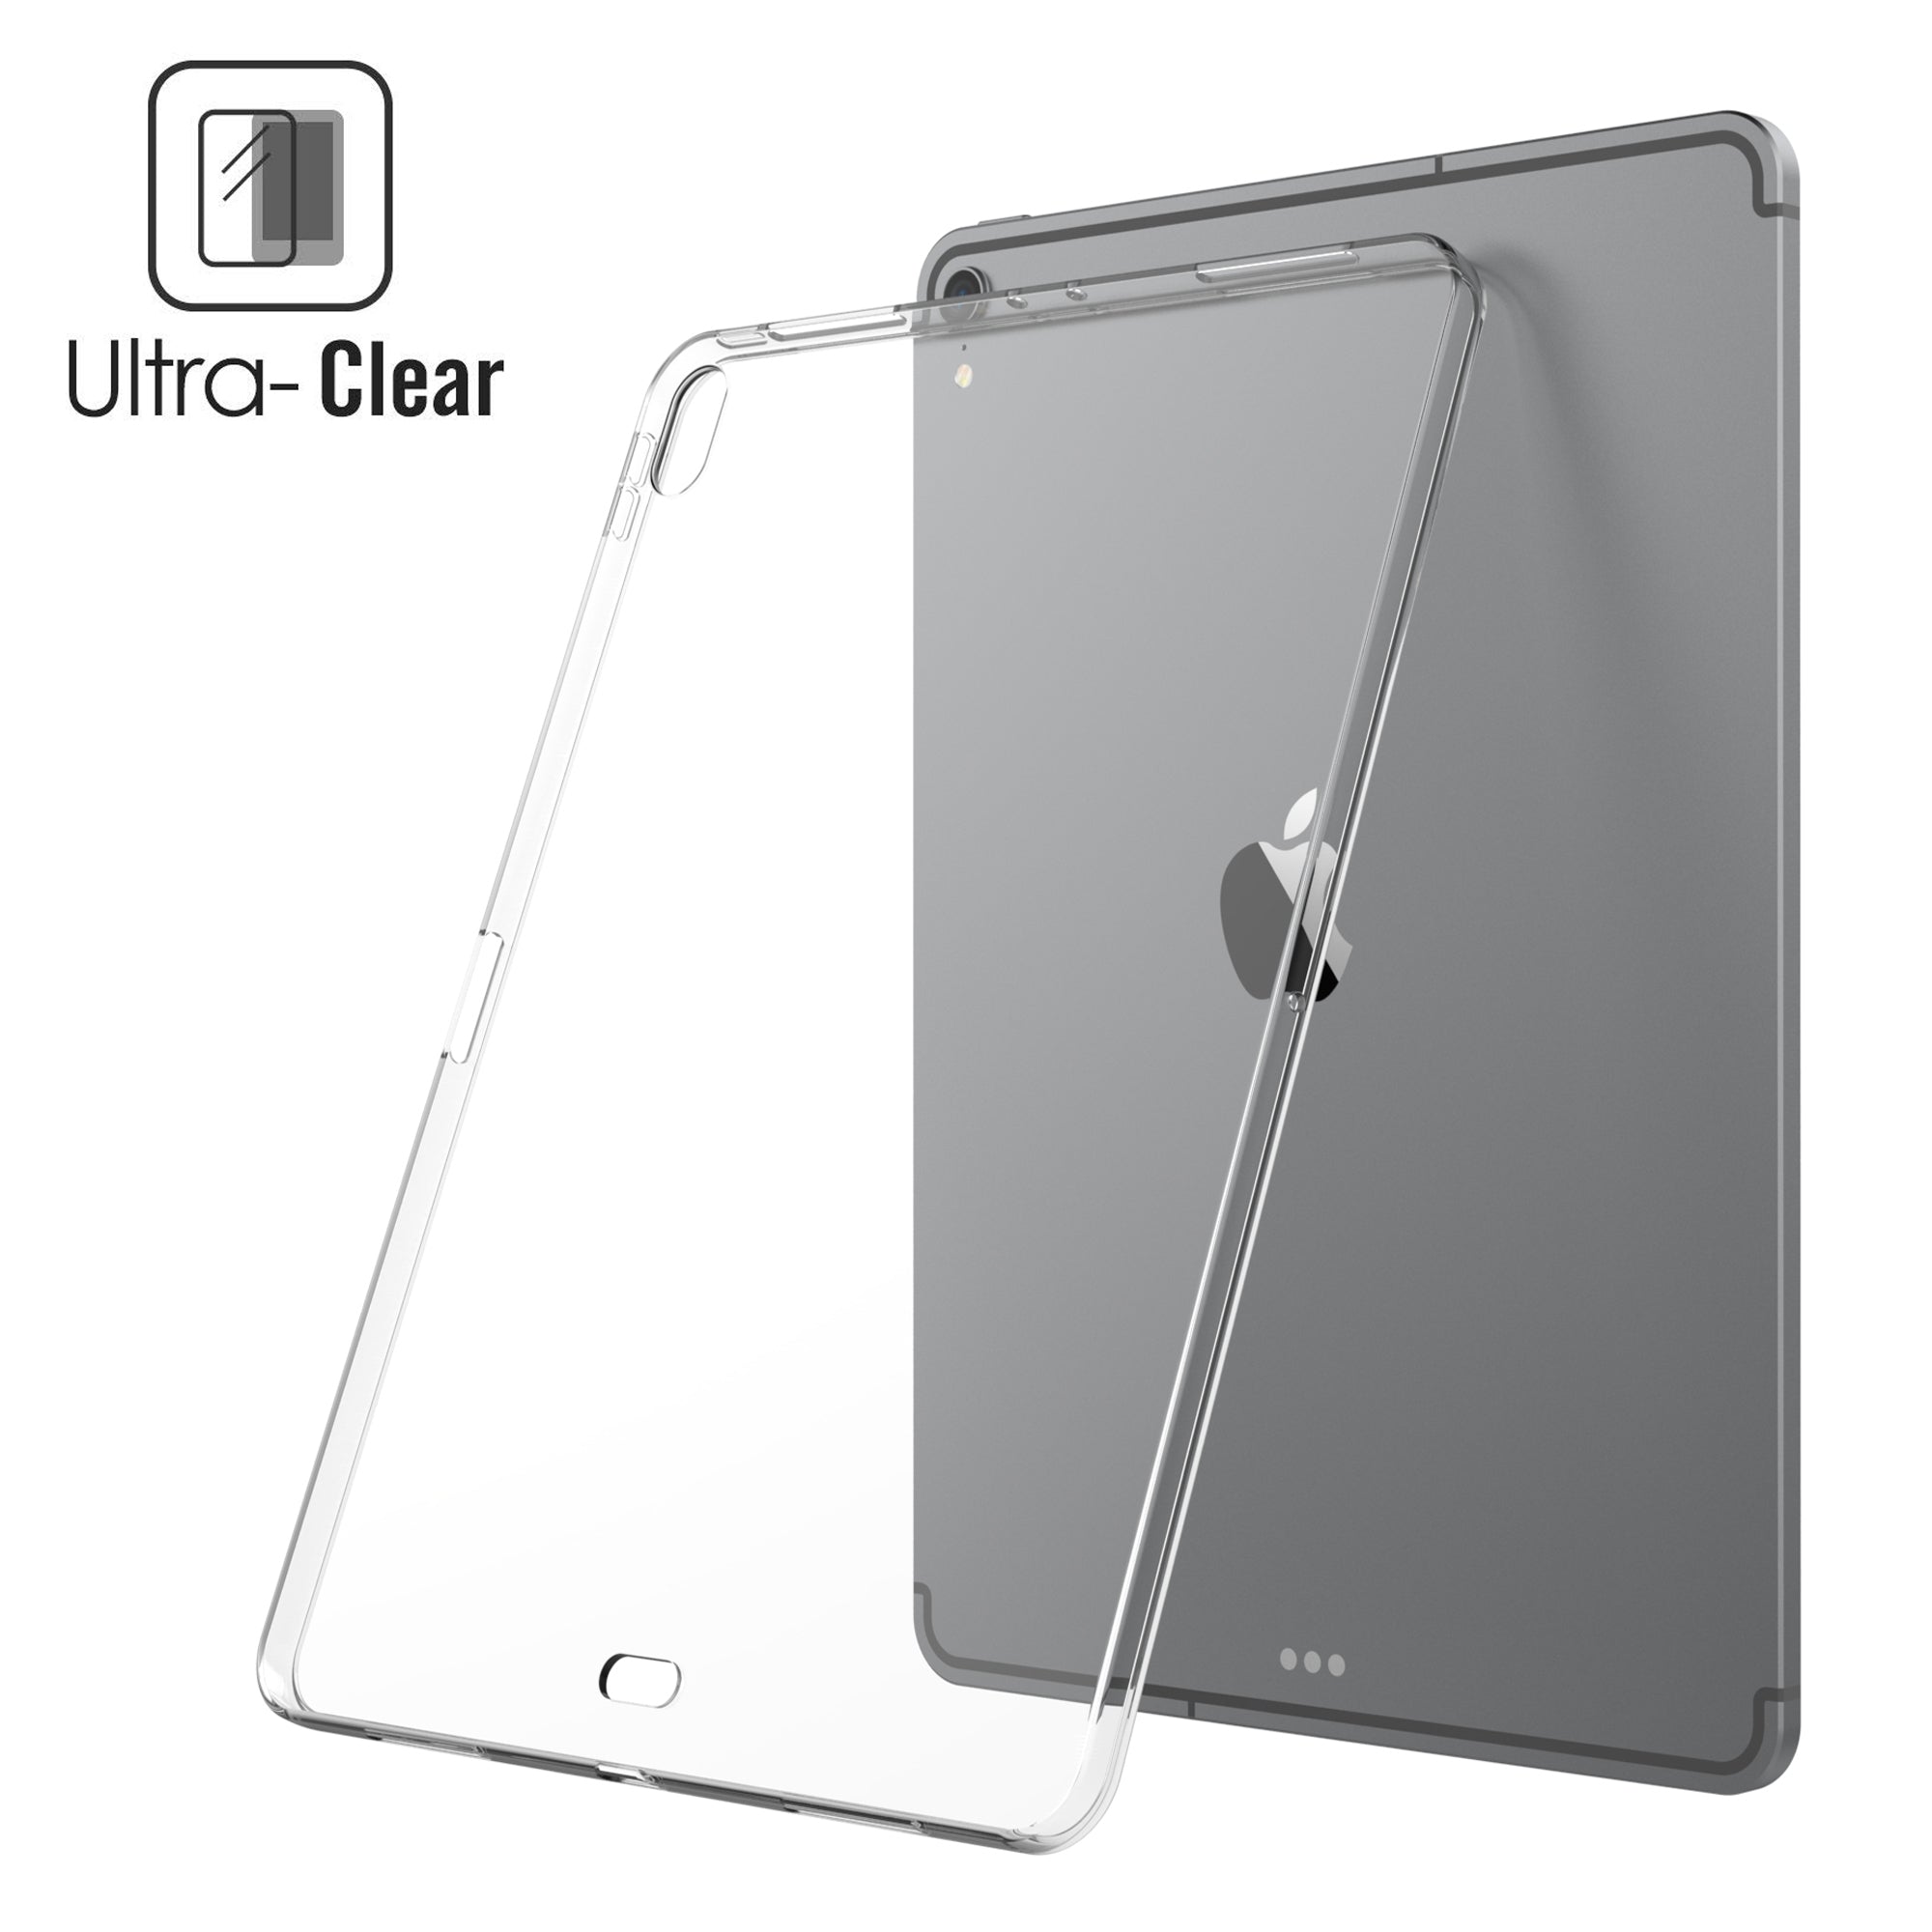 Luvvitt CLARITY Case TPU Flexible Cover for Apple iPad Pro 12.9 in 2018 - Clear